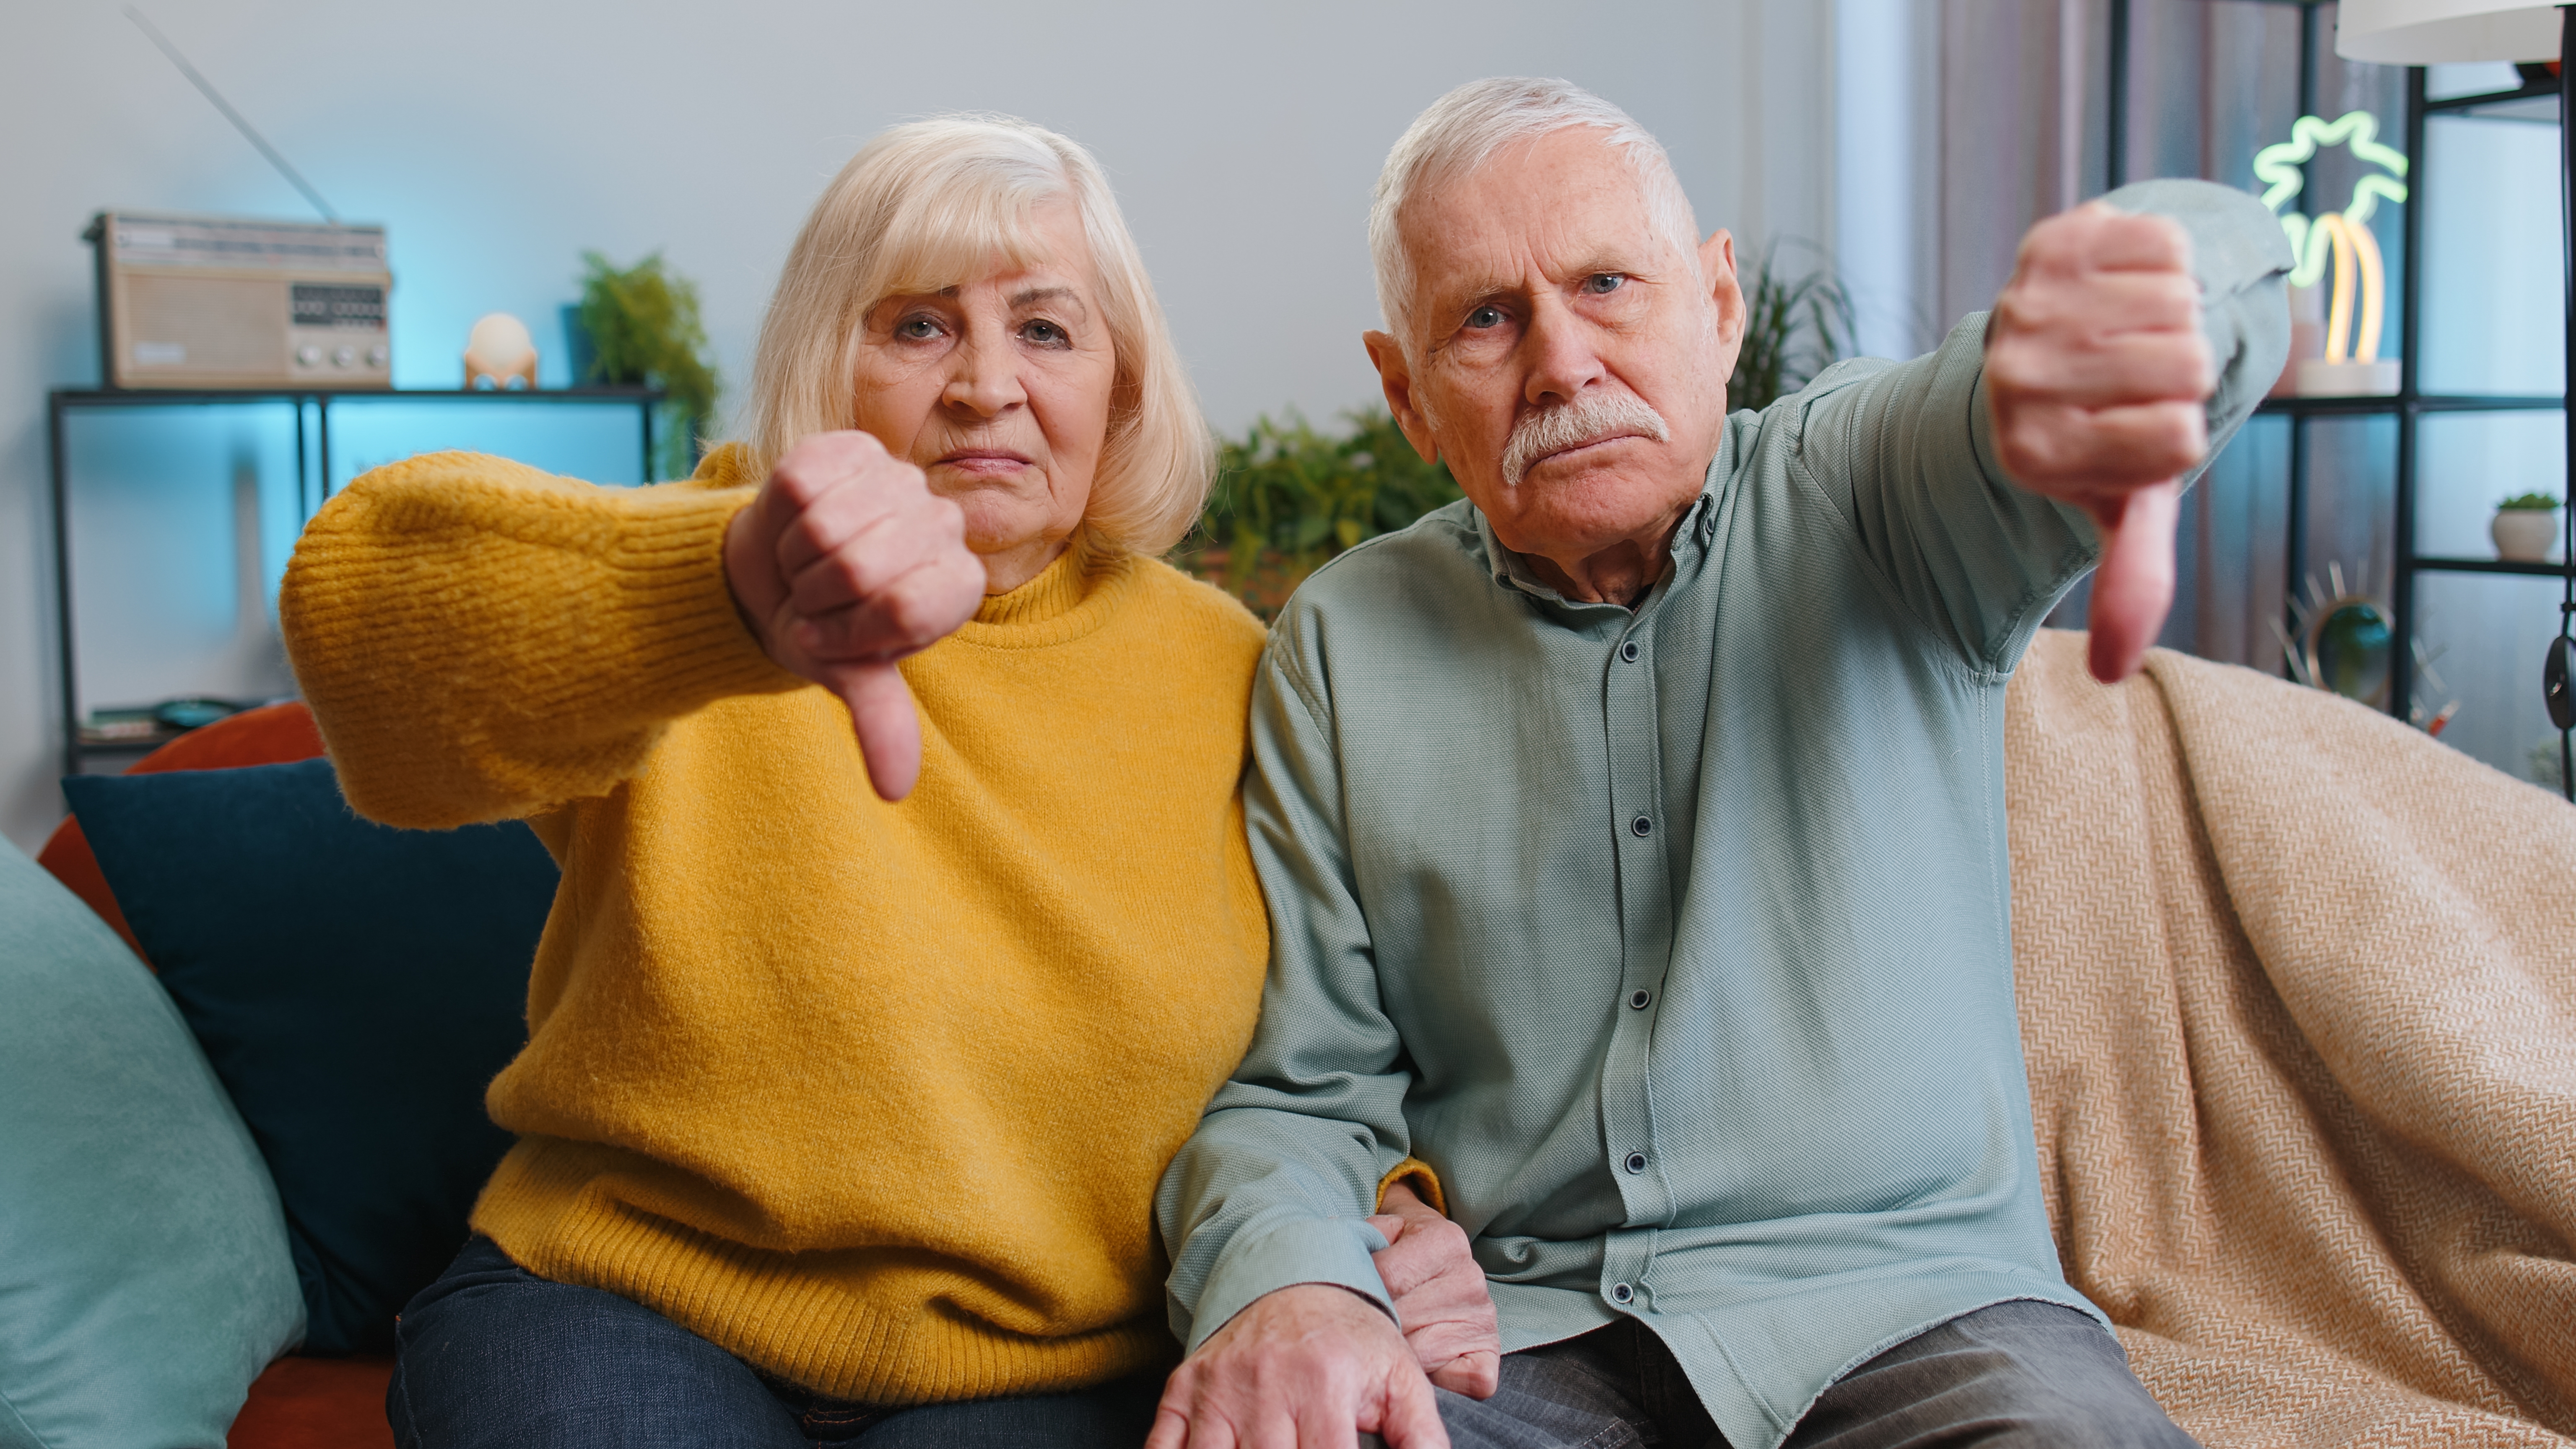 Senior couple showing thumbs down sign | Source: Shutterstock